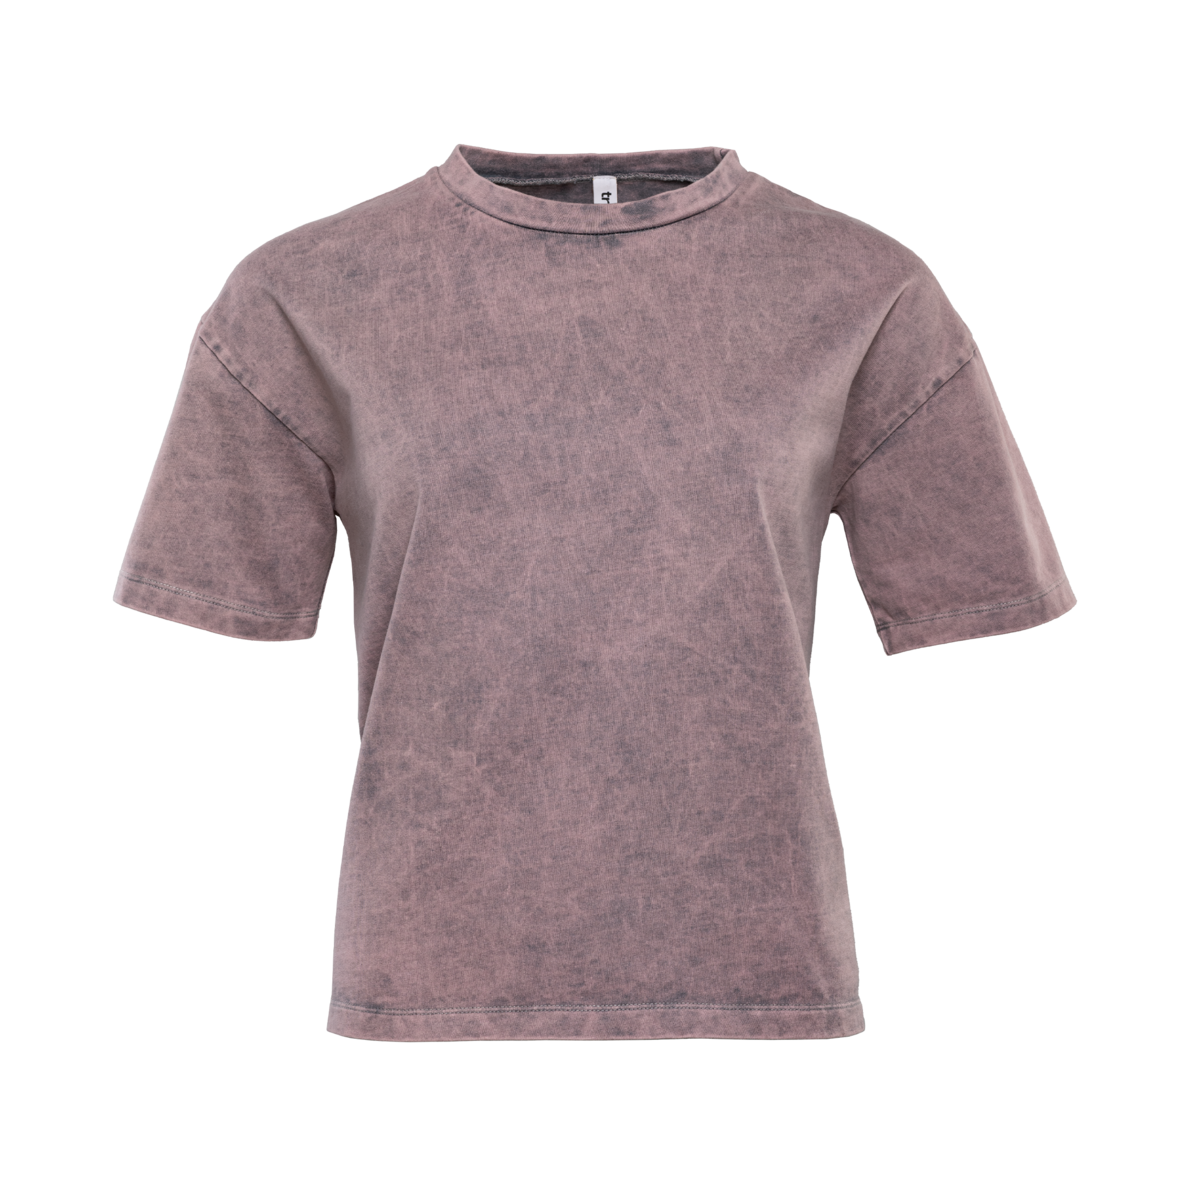 Brown Crafted boxy T-shirt, BENJA